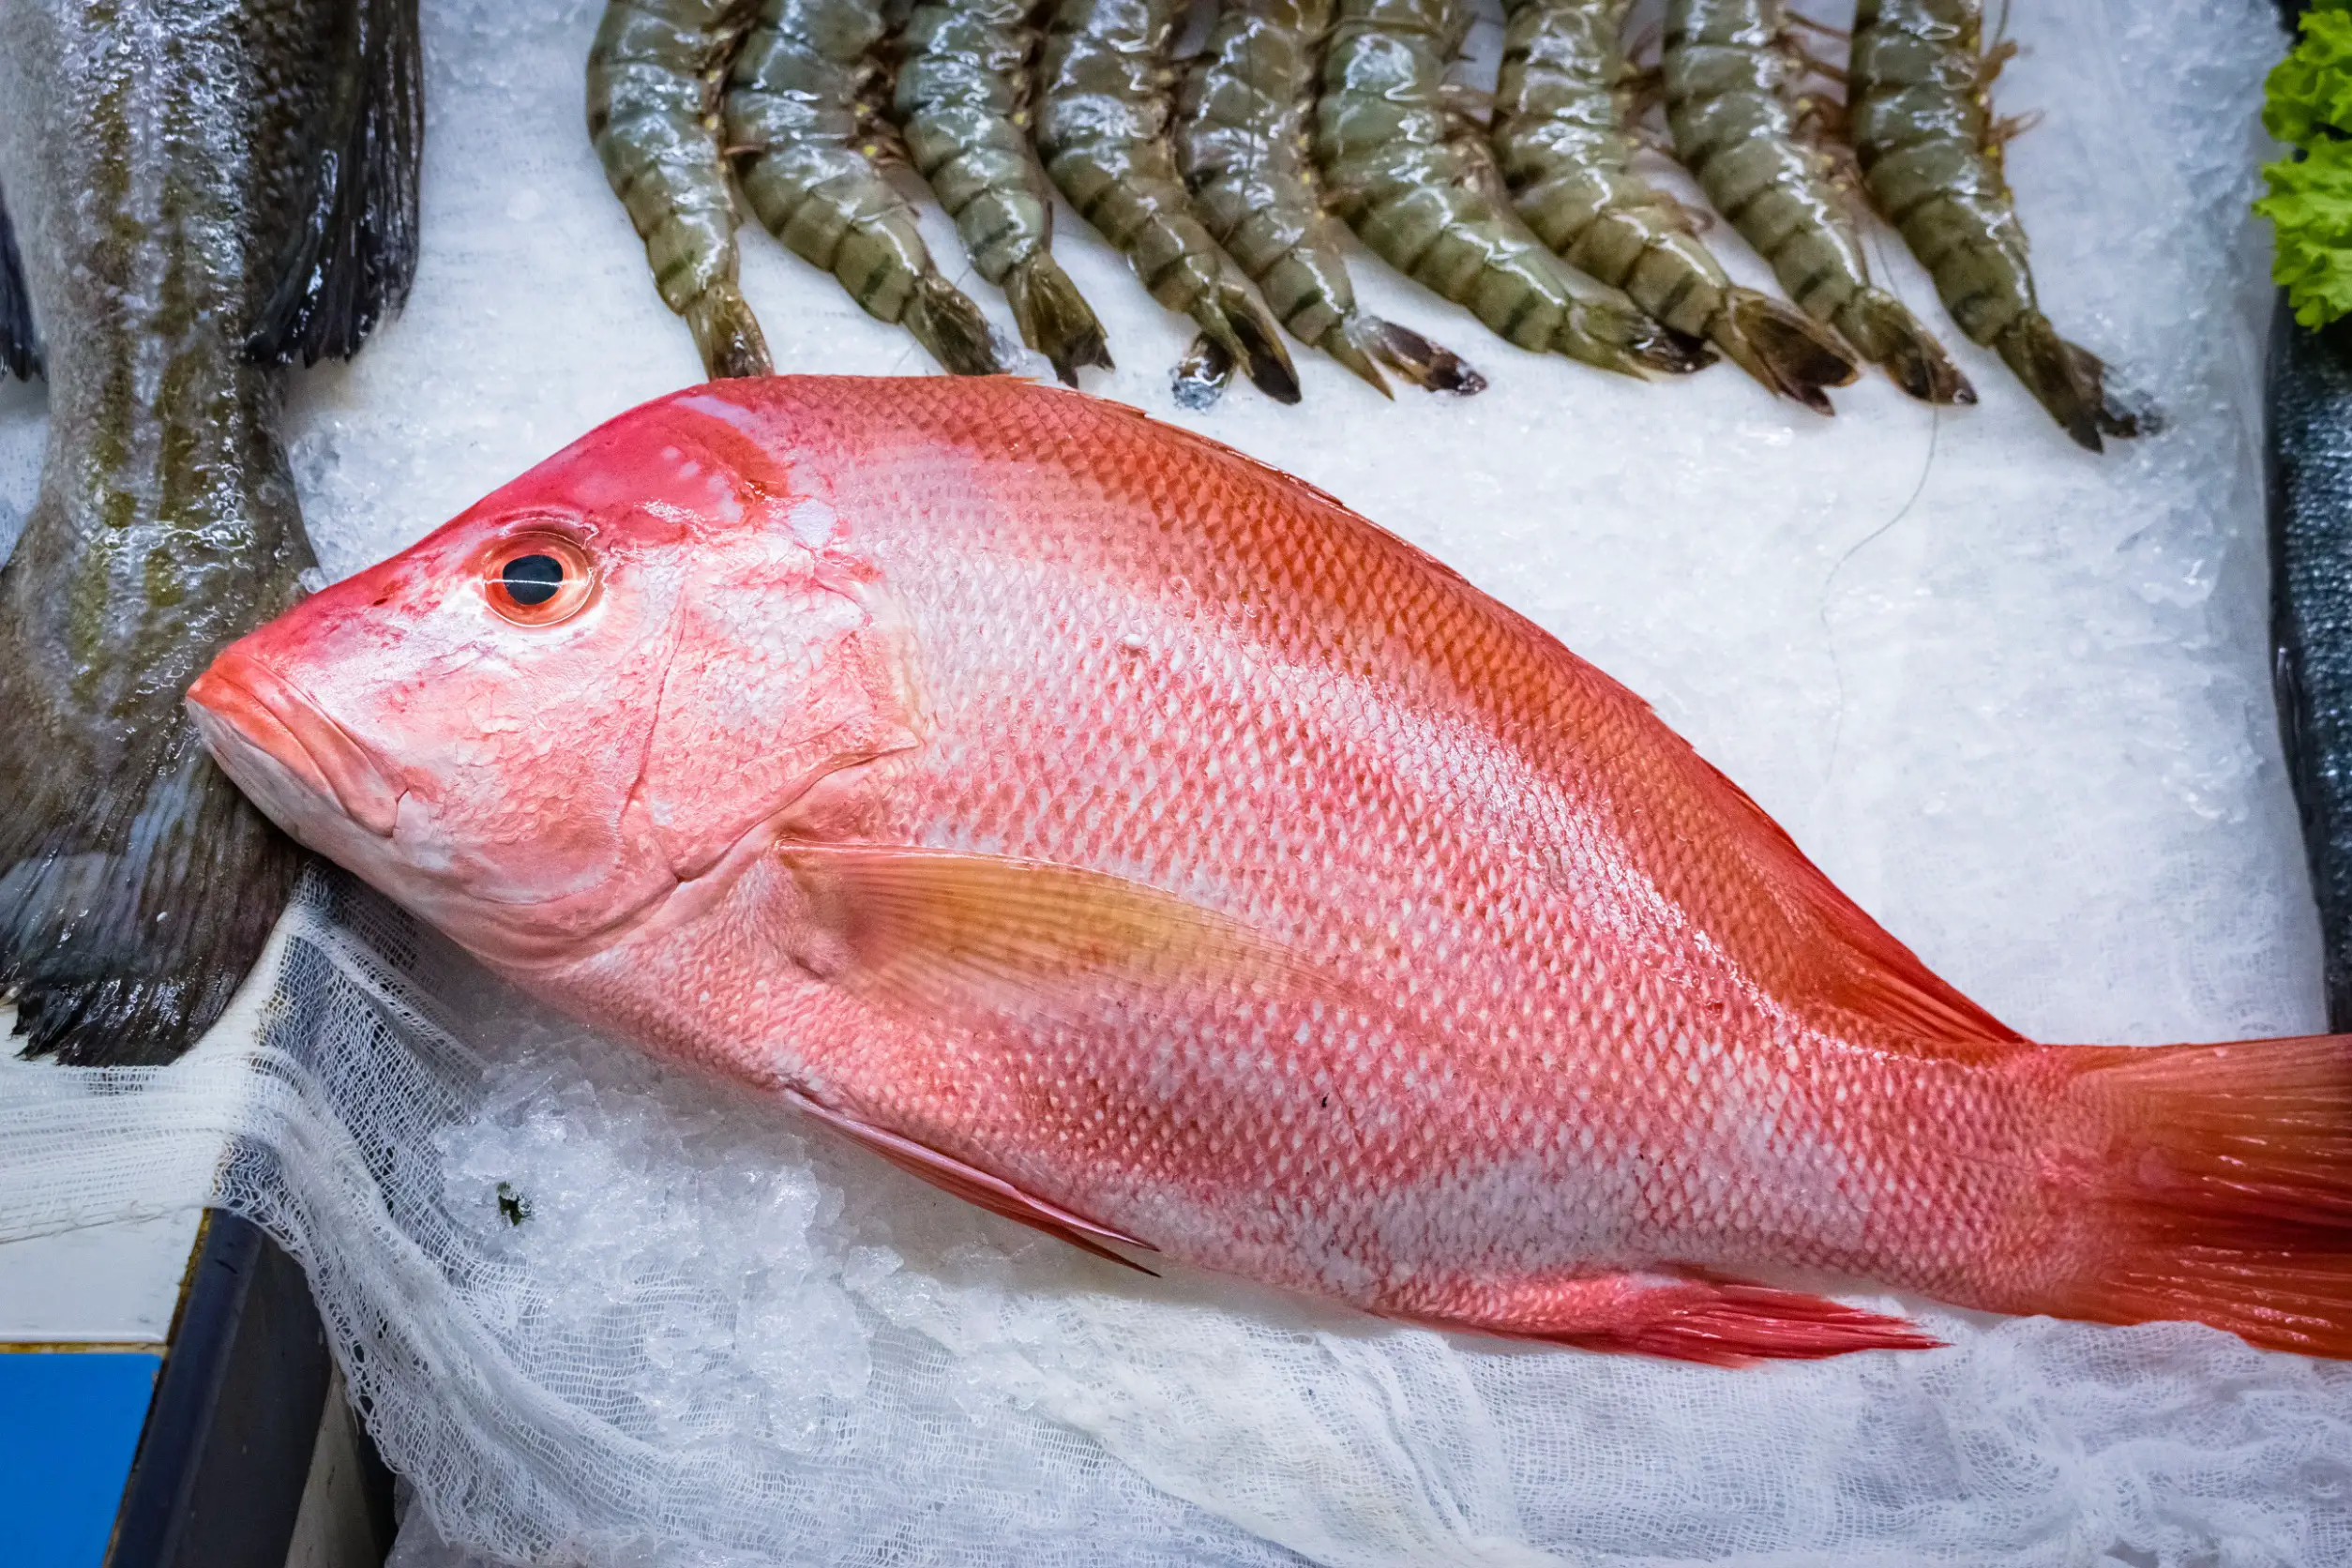 Red snapper at a market